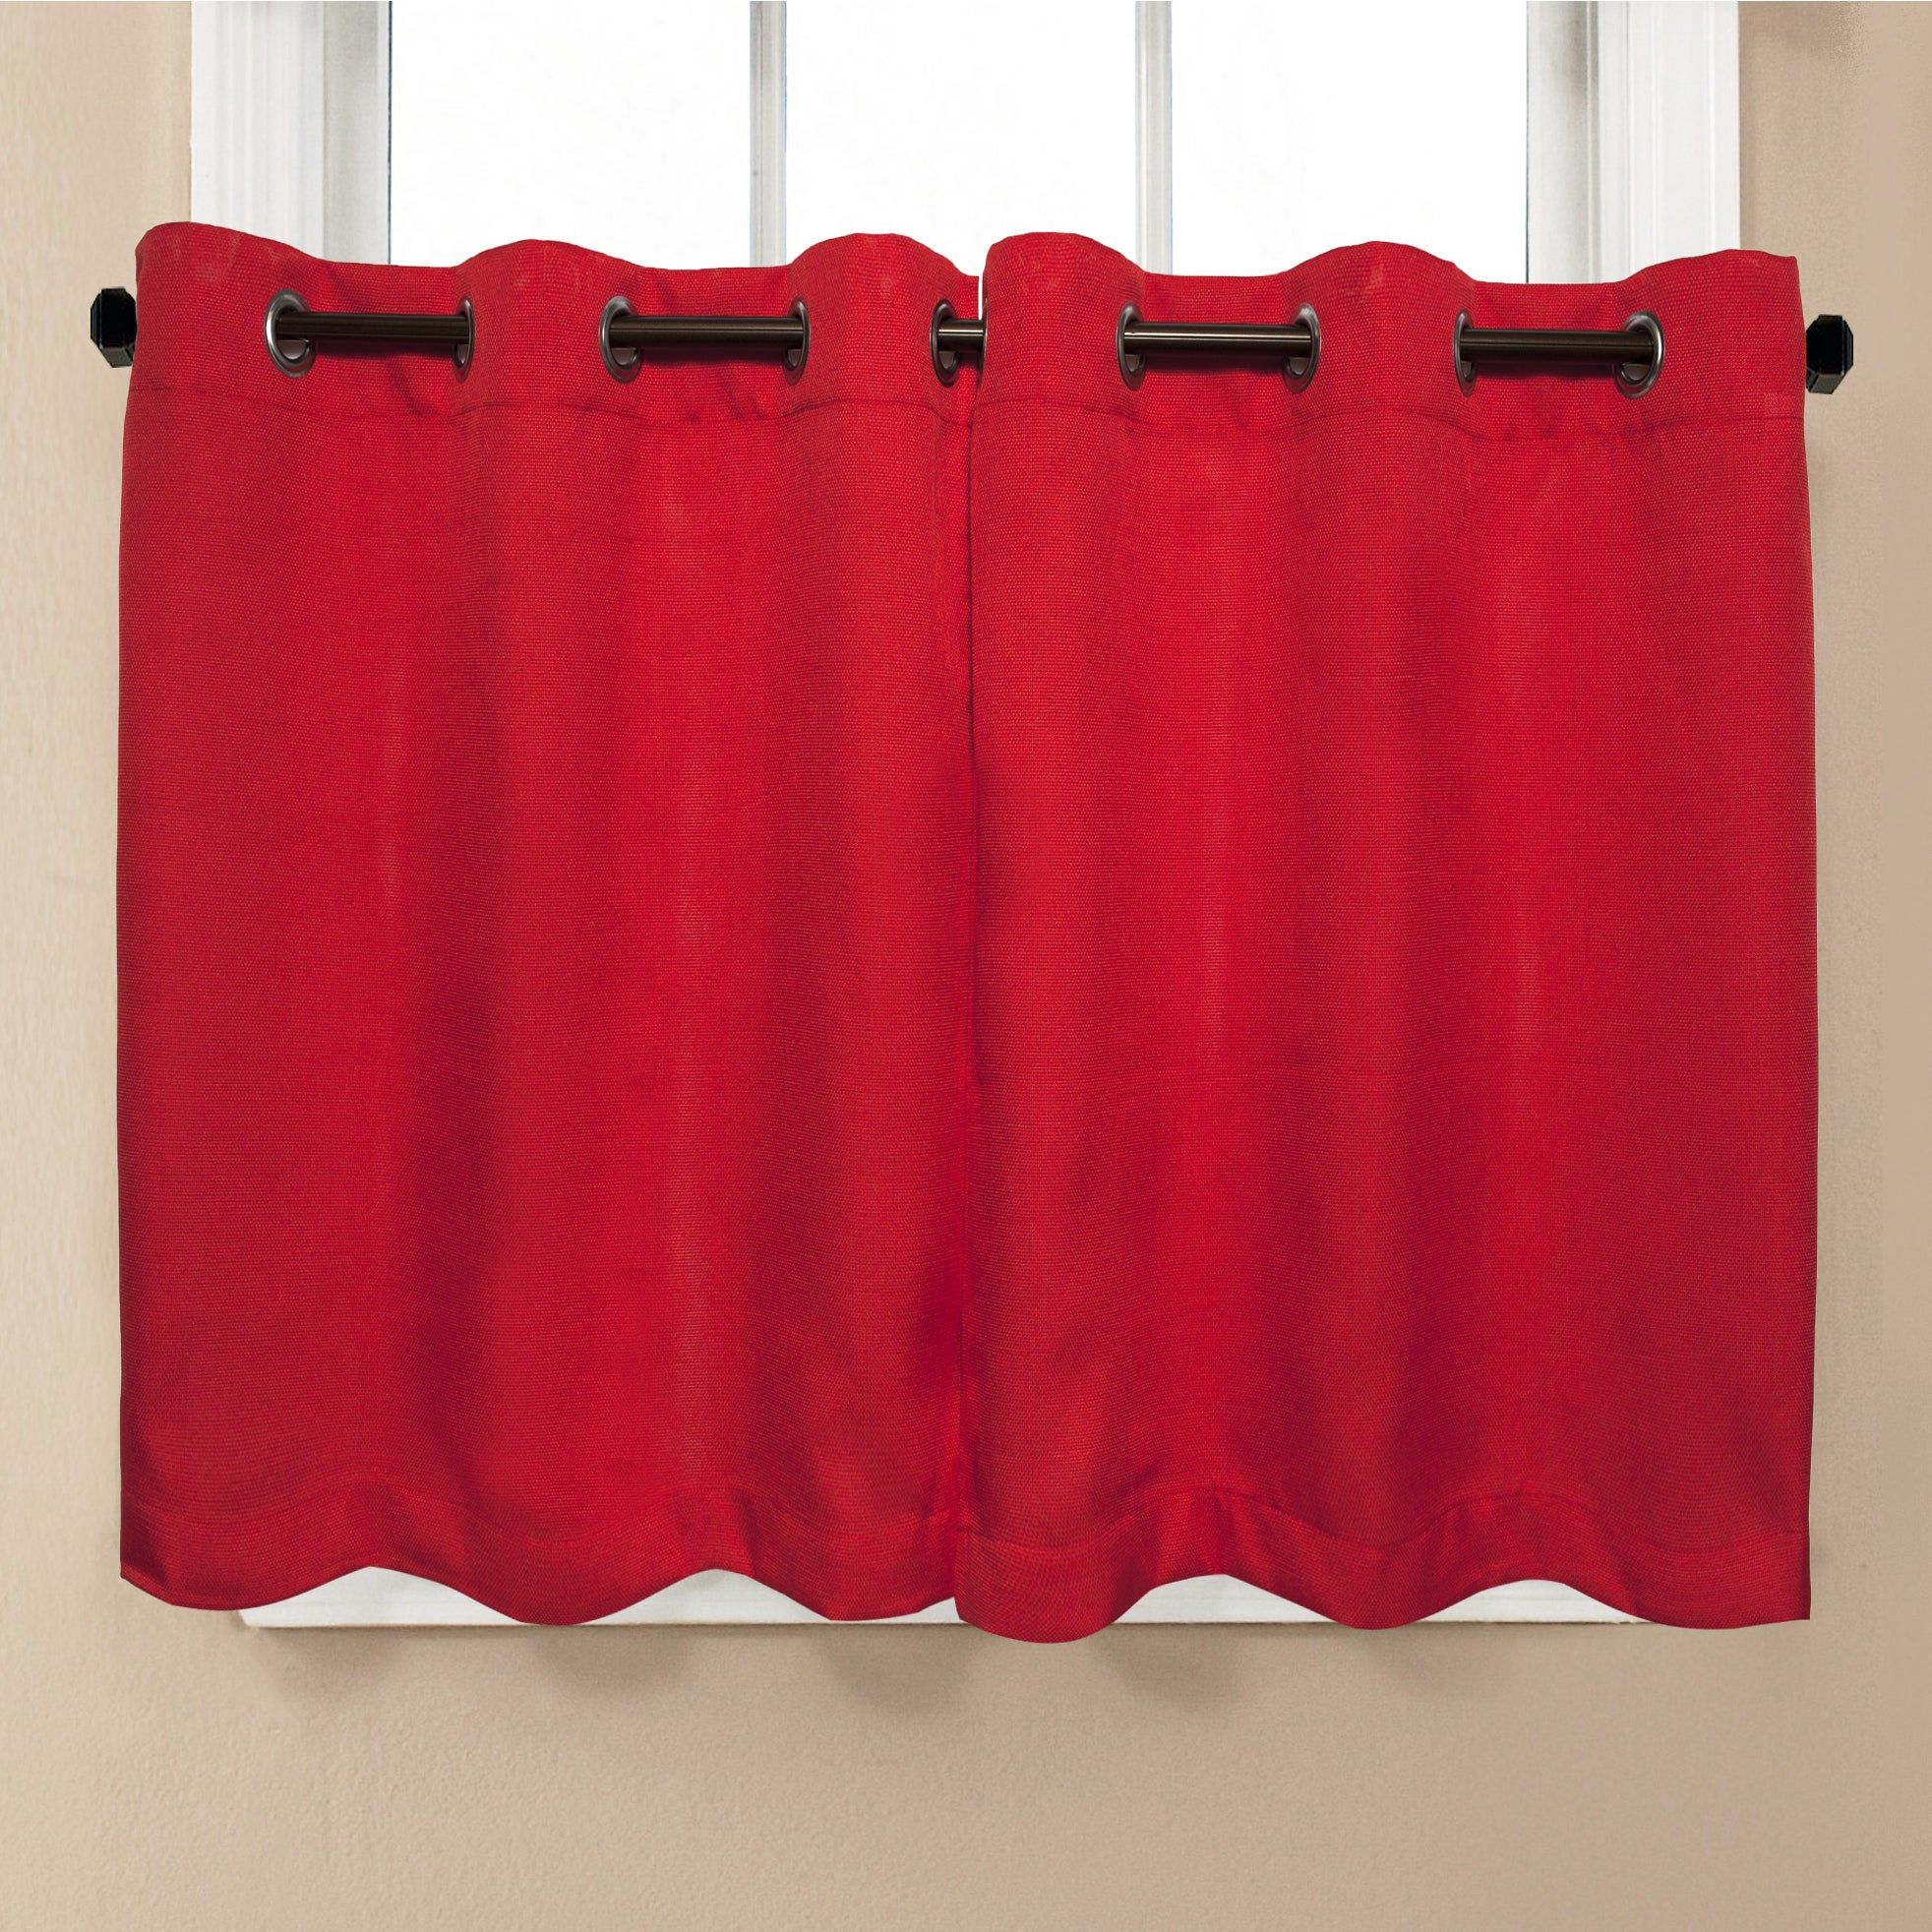 Modern Subtle Texture Solid Red Kitchen Curtain Parts With Grommets  Tier  And Valance Options Pertaining To Modern Subtle Texture Solid Red Kitchen Curtains (View 2 of 20)